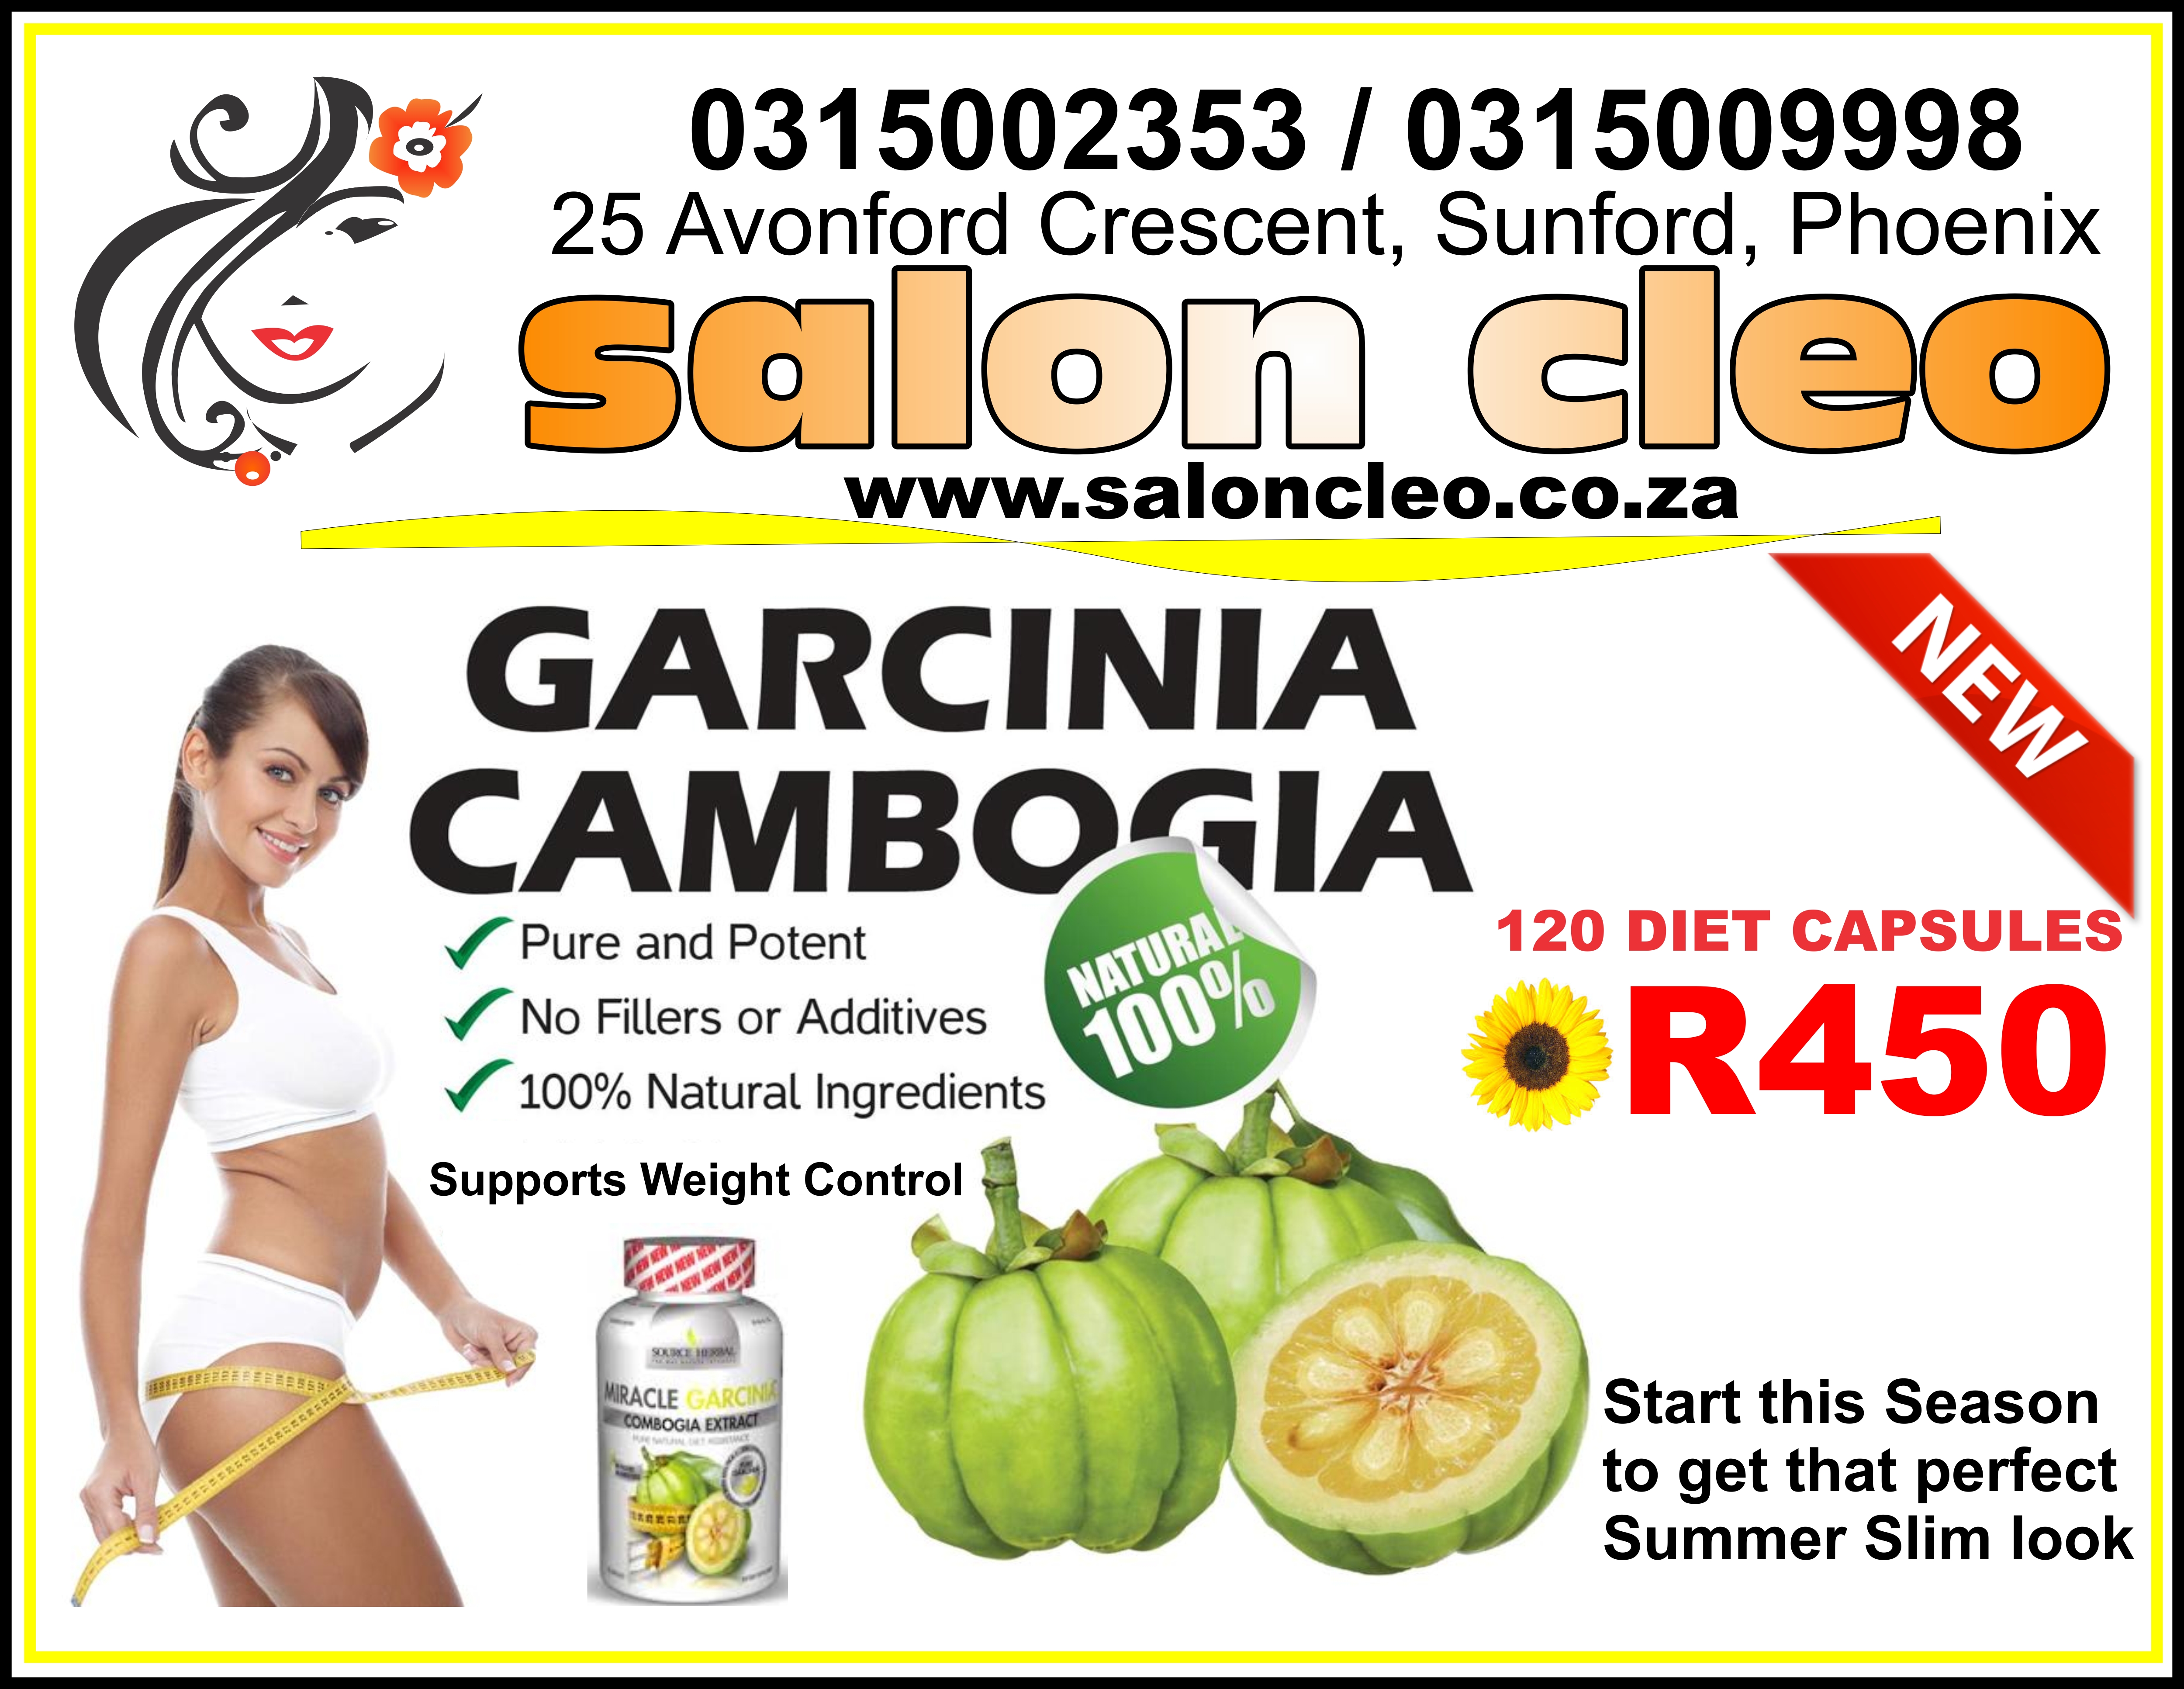 miracle GARCINIA CAMBOGIA HEALTH WEIGHT LOSS CAPSULES DR OZ EXCLUSIVE TO SALON CLEO DURBAN PHOENIX 0315002353 What is Garcinia Cambogia? Garcinia Cambogia Fruit  Garcinia cambogia is a plant, also known as Garcinia gummi-gutta.  The fruit of the plant looks like a small, green pumpkin and is used in many traditional Asian dishes for its sour flavor.  In the skin of the fruit, there is a large amount of a natural substance called Hydroxycitric Acid (HCA).  This is the active ingredient in Garcinia Cambogia extract? that is, the substance that produces the weight loss effects. AT SALON CLEO PHOENIX DURBAN 0315002353